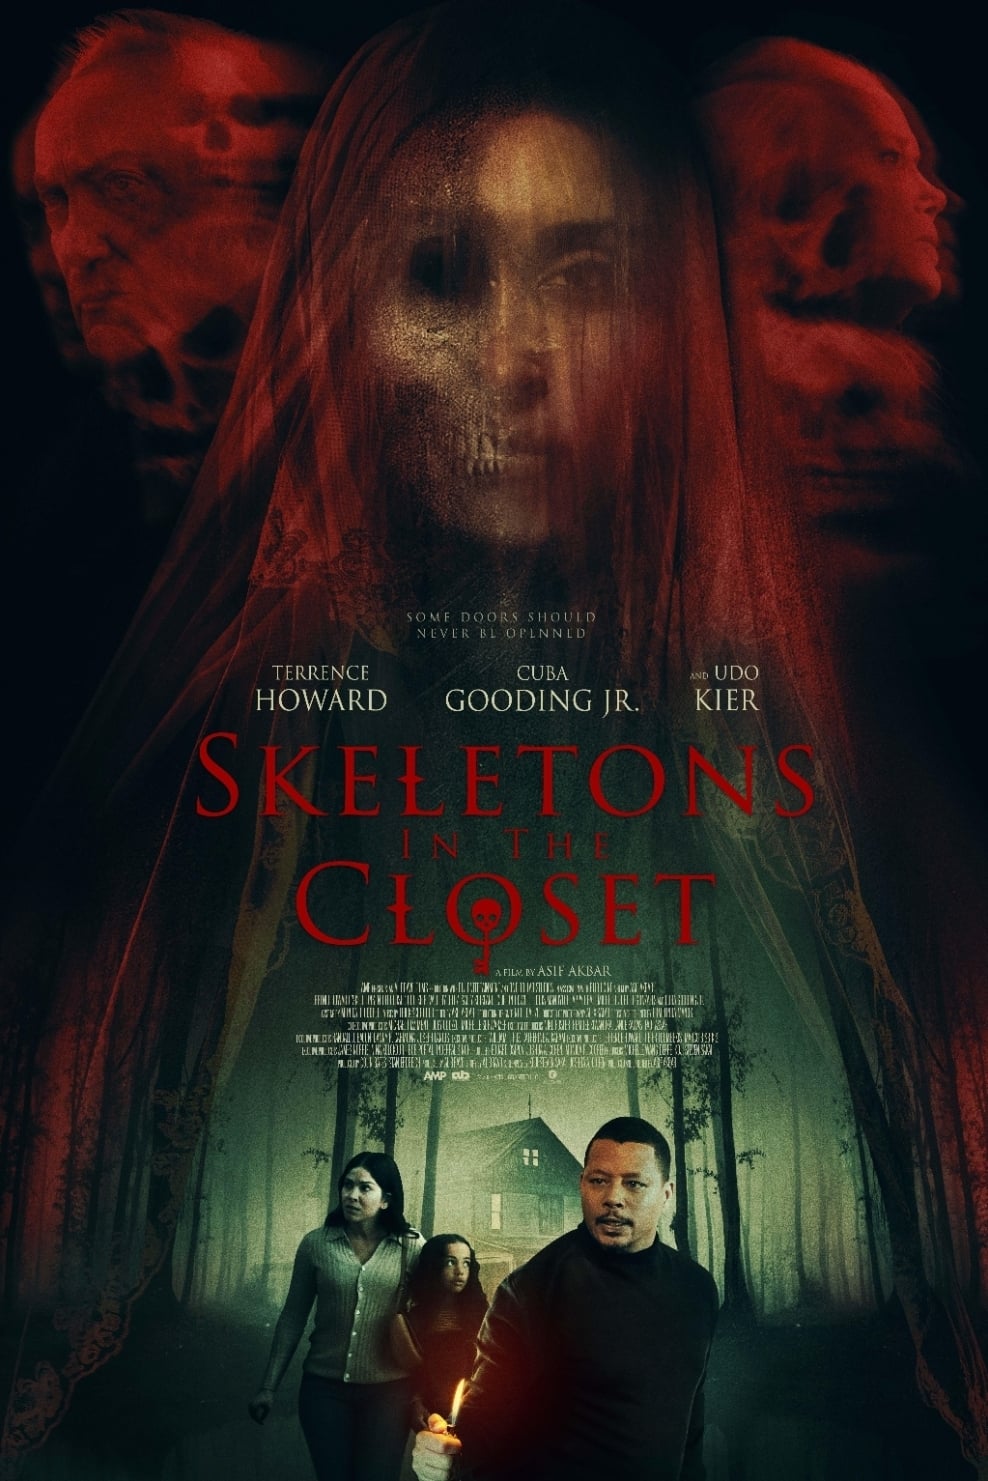 Poster for the movie "Skeletons in the Closet"